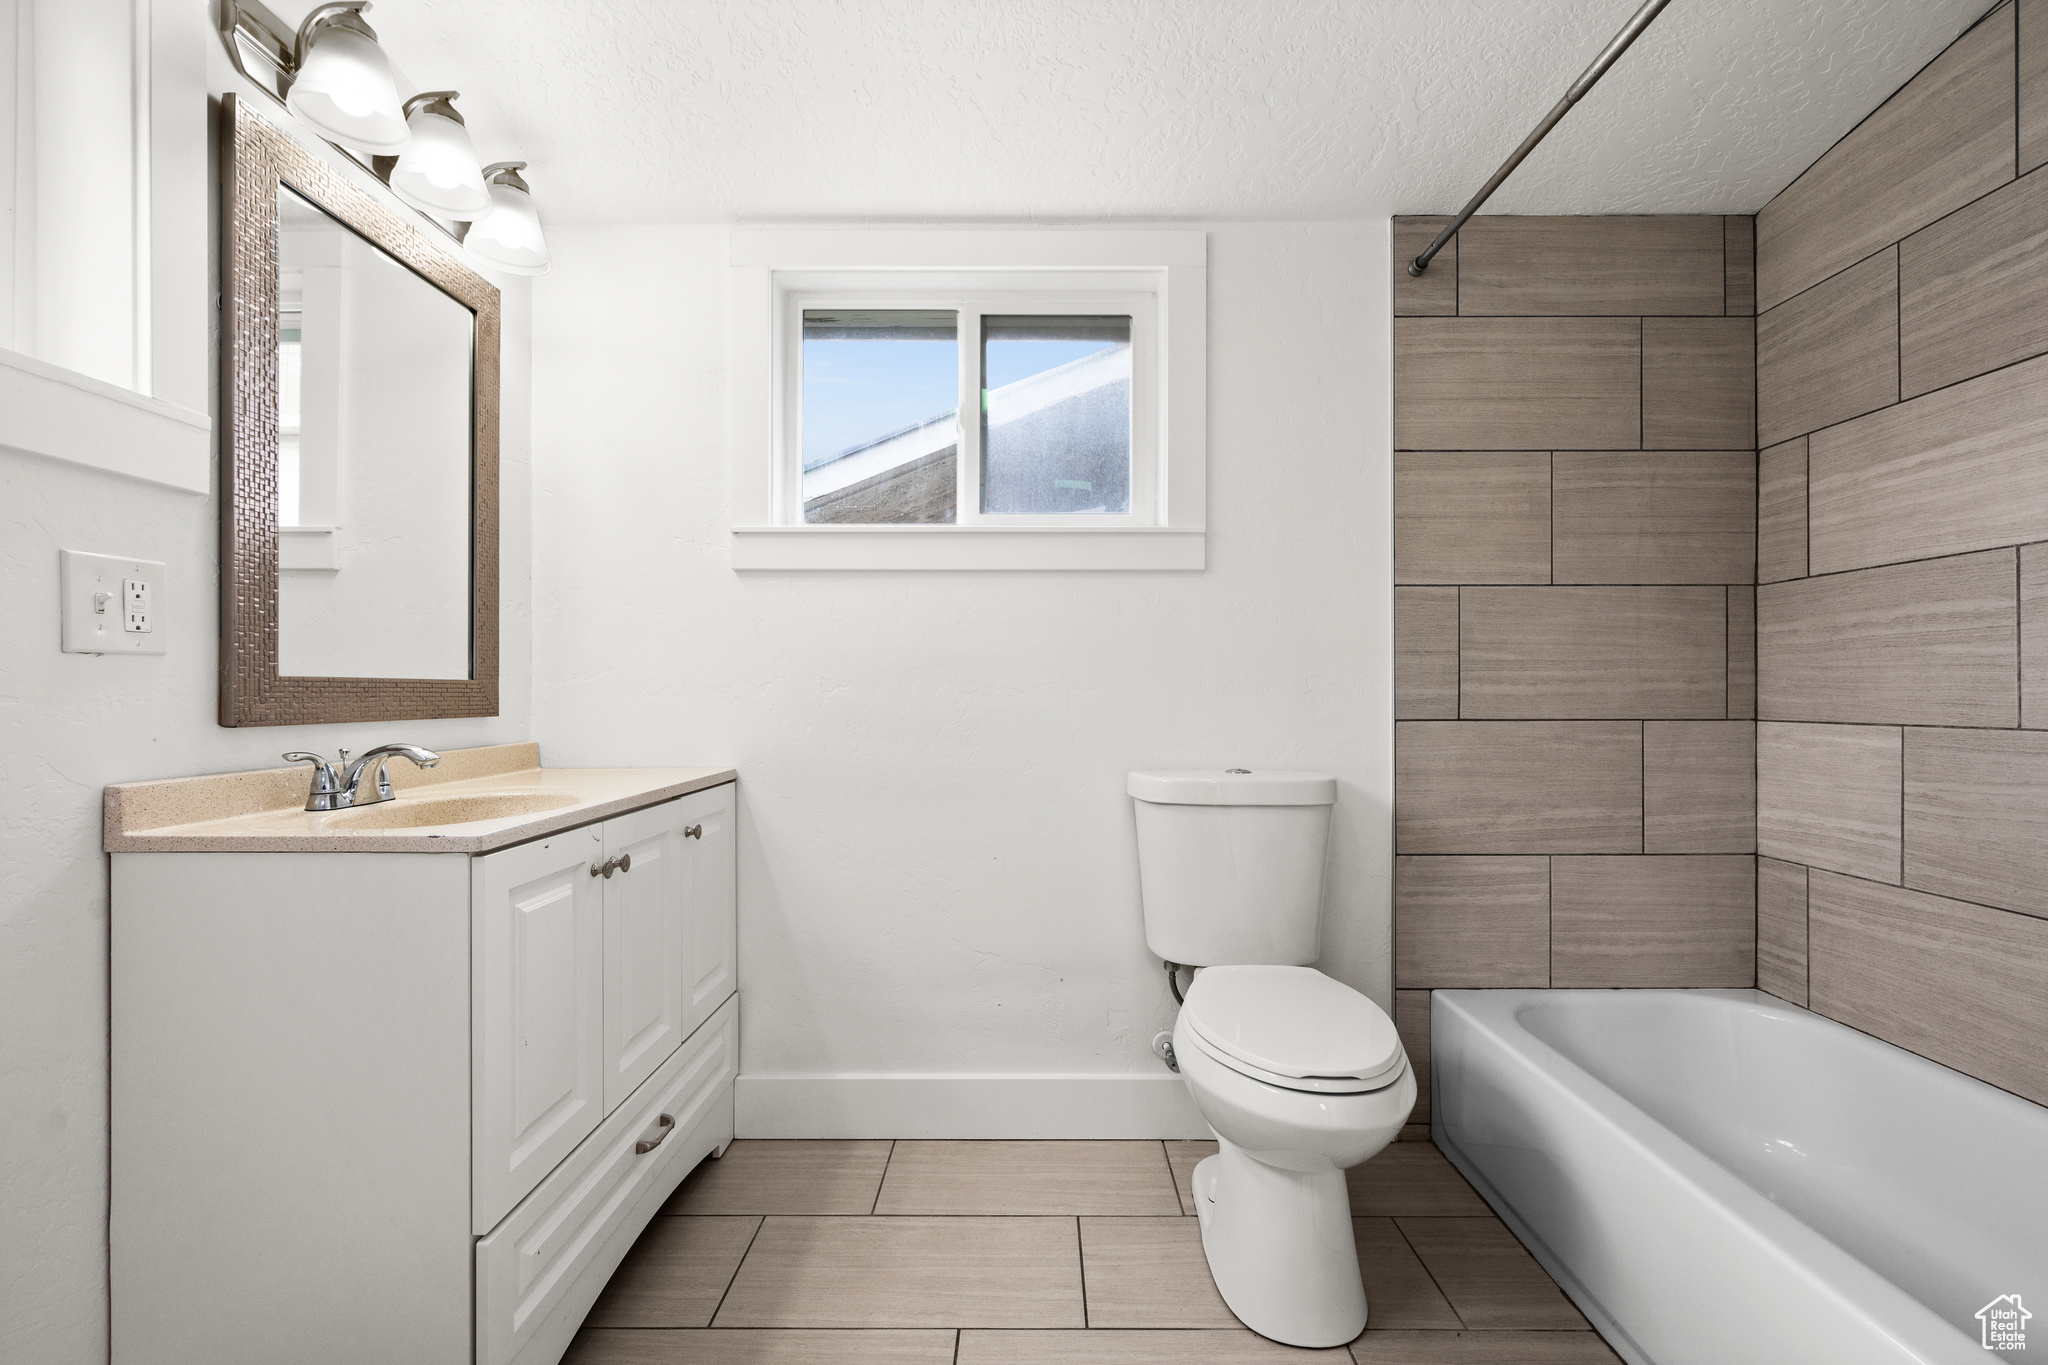 Full bathroom with vanity, shower / washtub combination, a textured ceiling, toilet, and tile floors